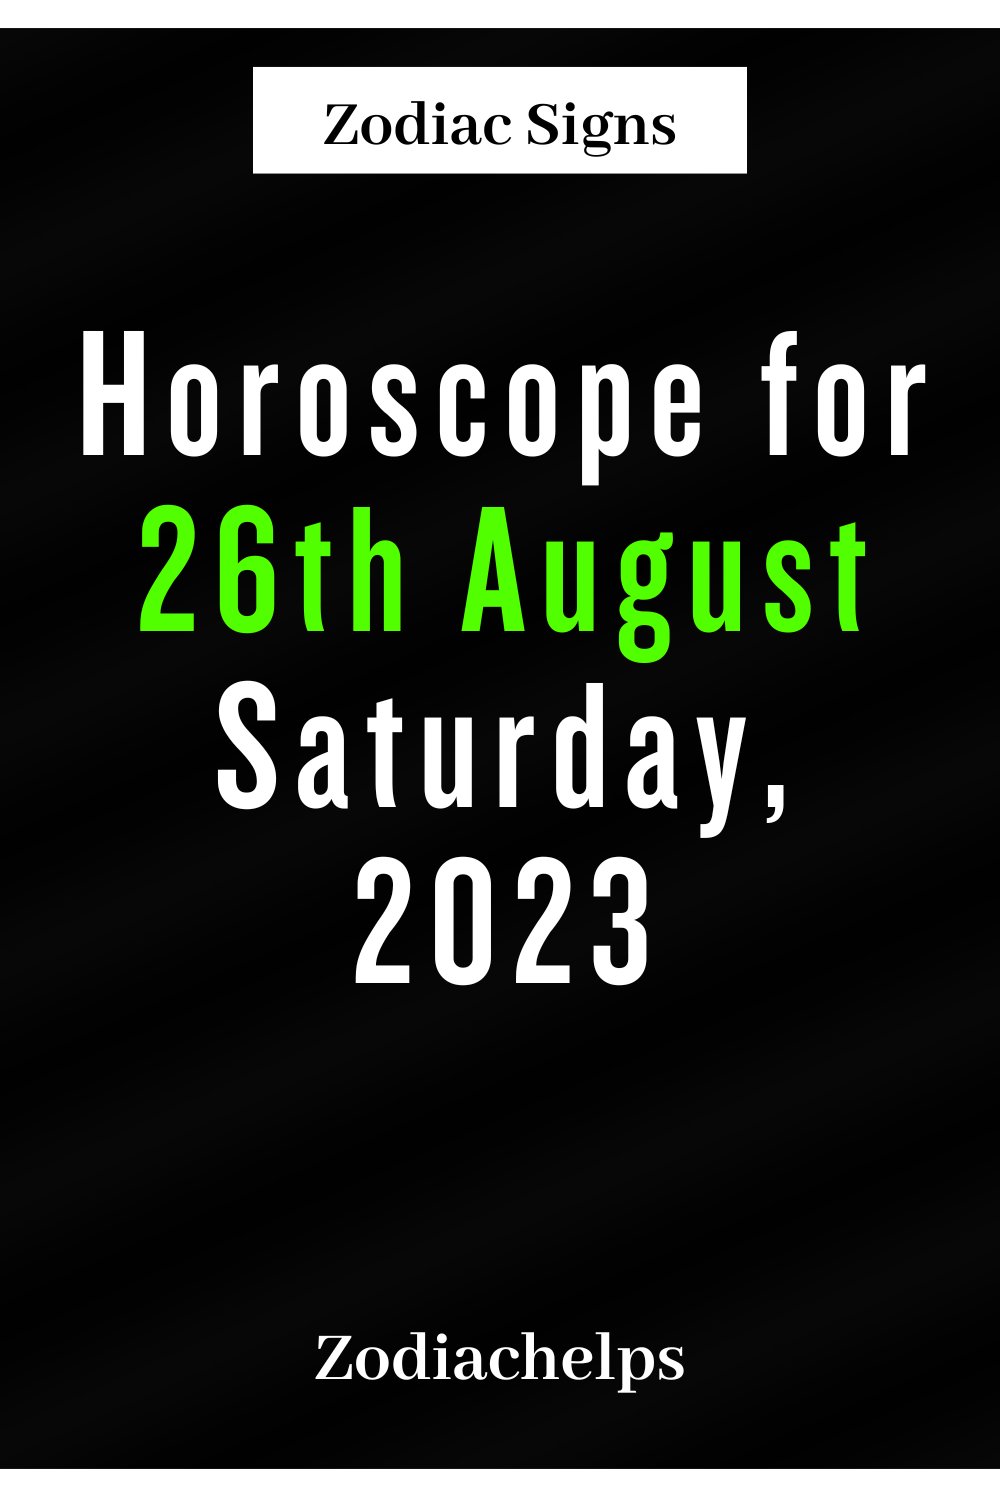 Horoscope for 26th August Saturday, 2023